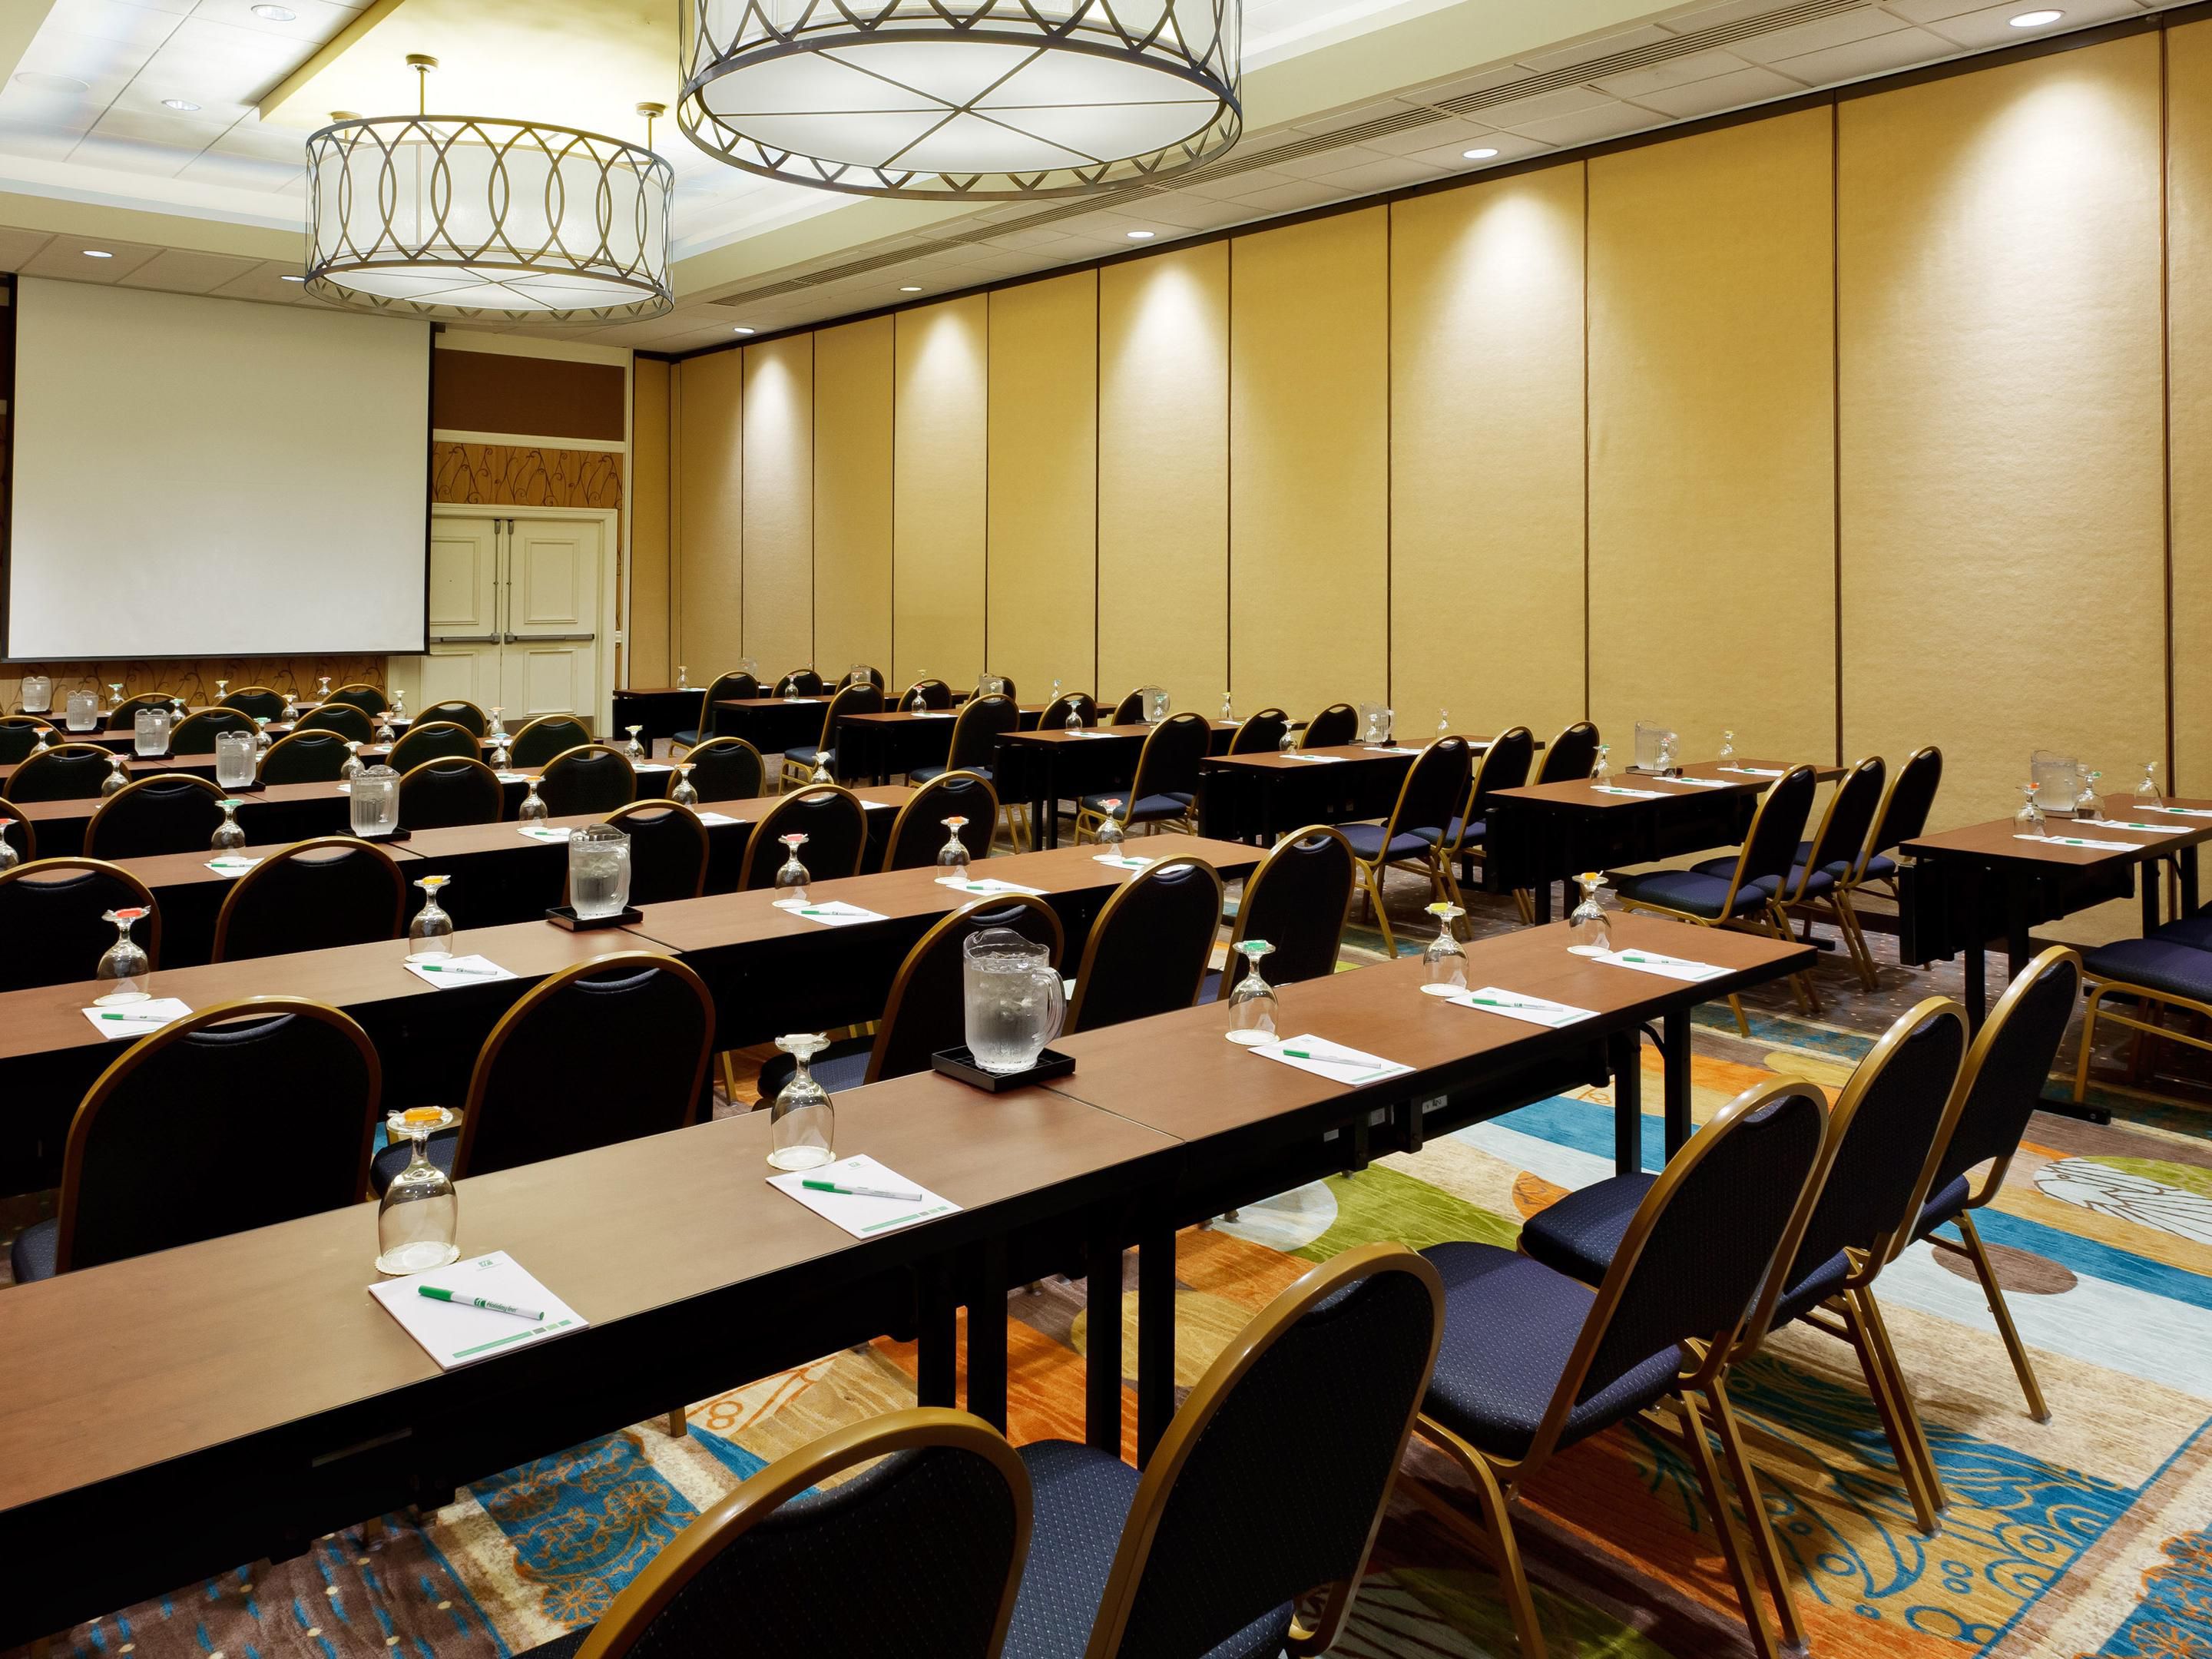 Meet, connect, or celebrate in our expansive meeting space in San Antonio, Texas. Holiday Inn San Antonio - Riverwalk features 10,000 square feet of flexible event space with nine meeting rooms, including the largest venue that accommodates 600 guests. Let our team assist with the arrangements, including
audiovisual and locally sourced catering.